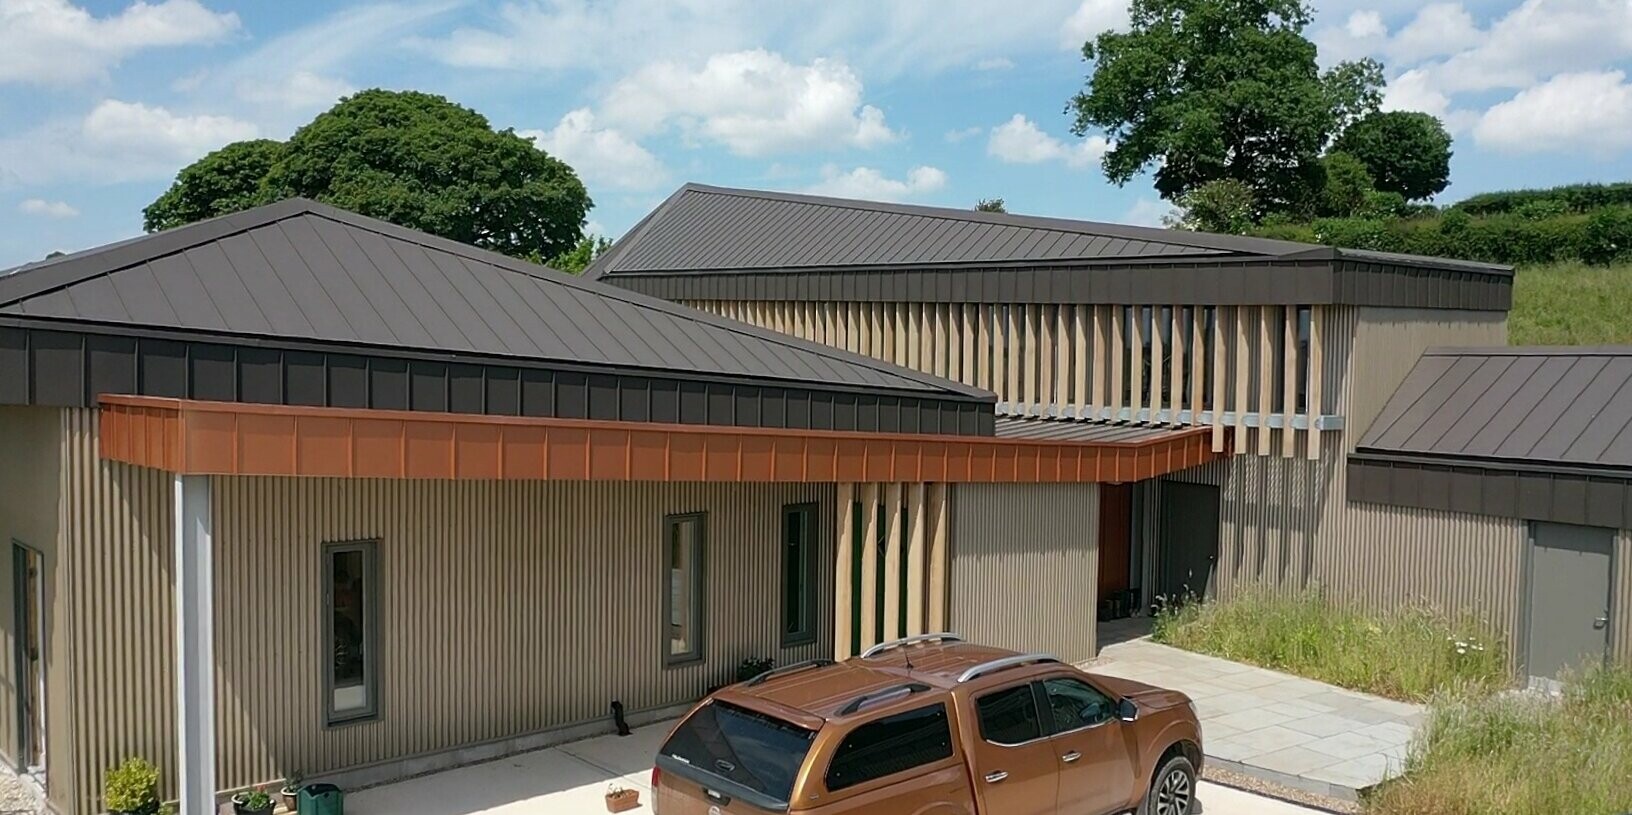 Entrance area of a longhouse in Derbyshire with parking space and a car